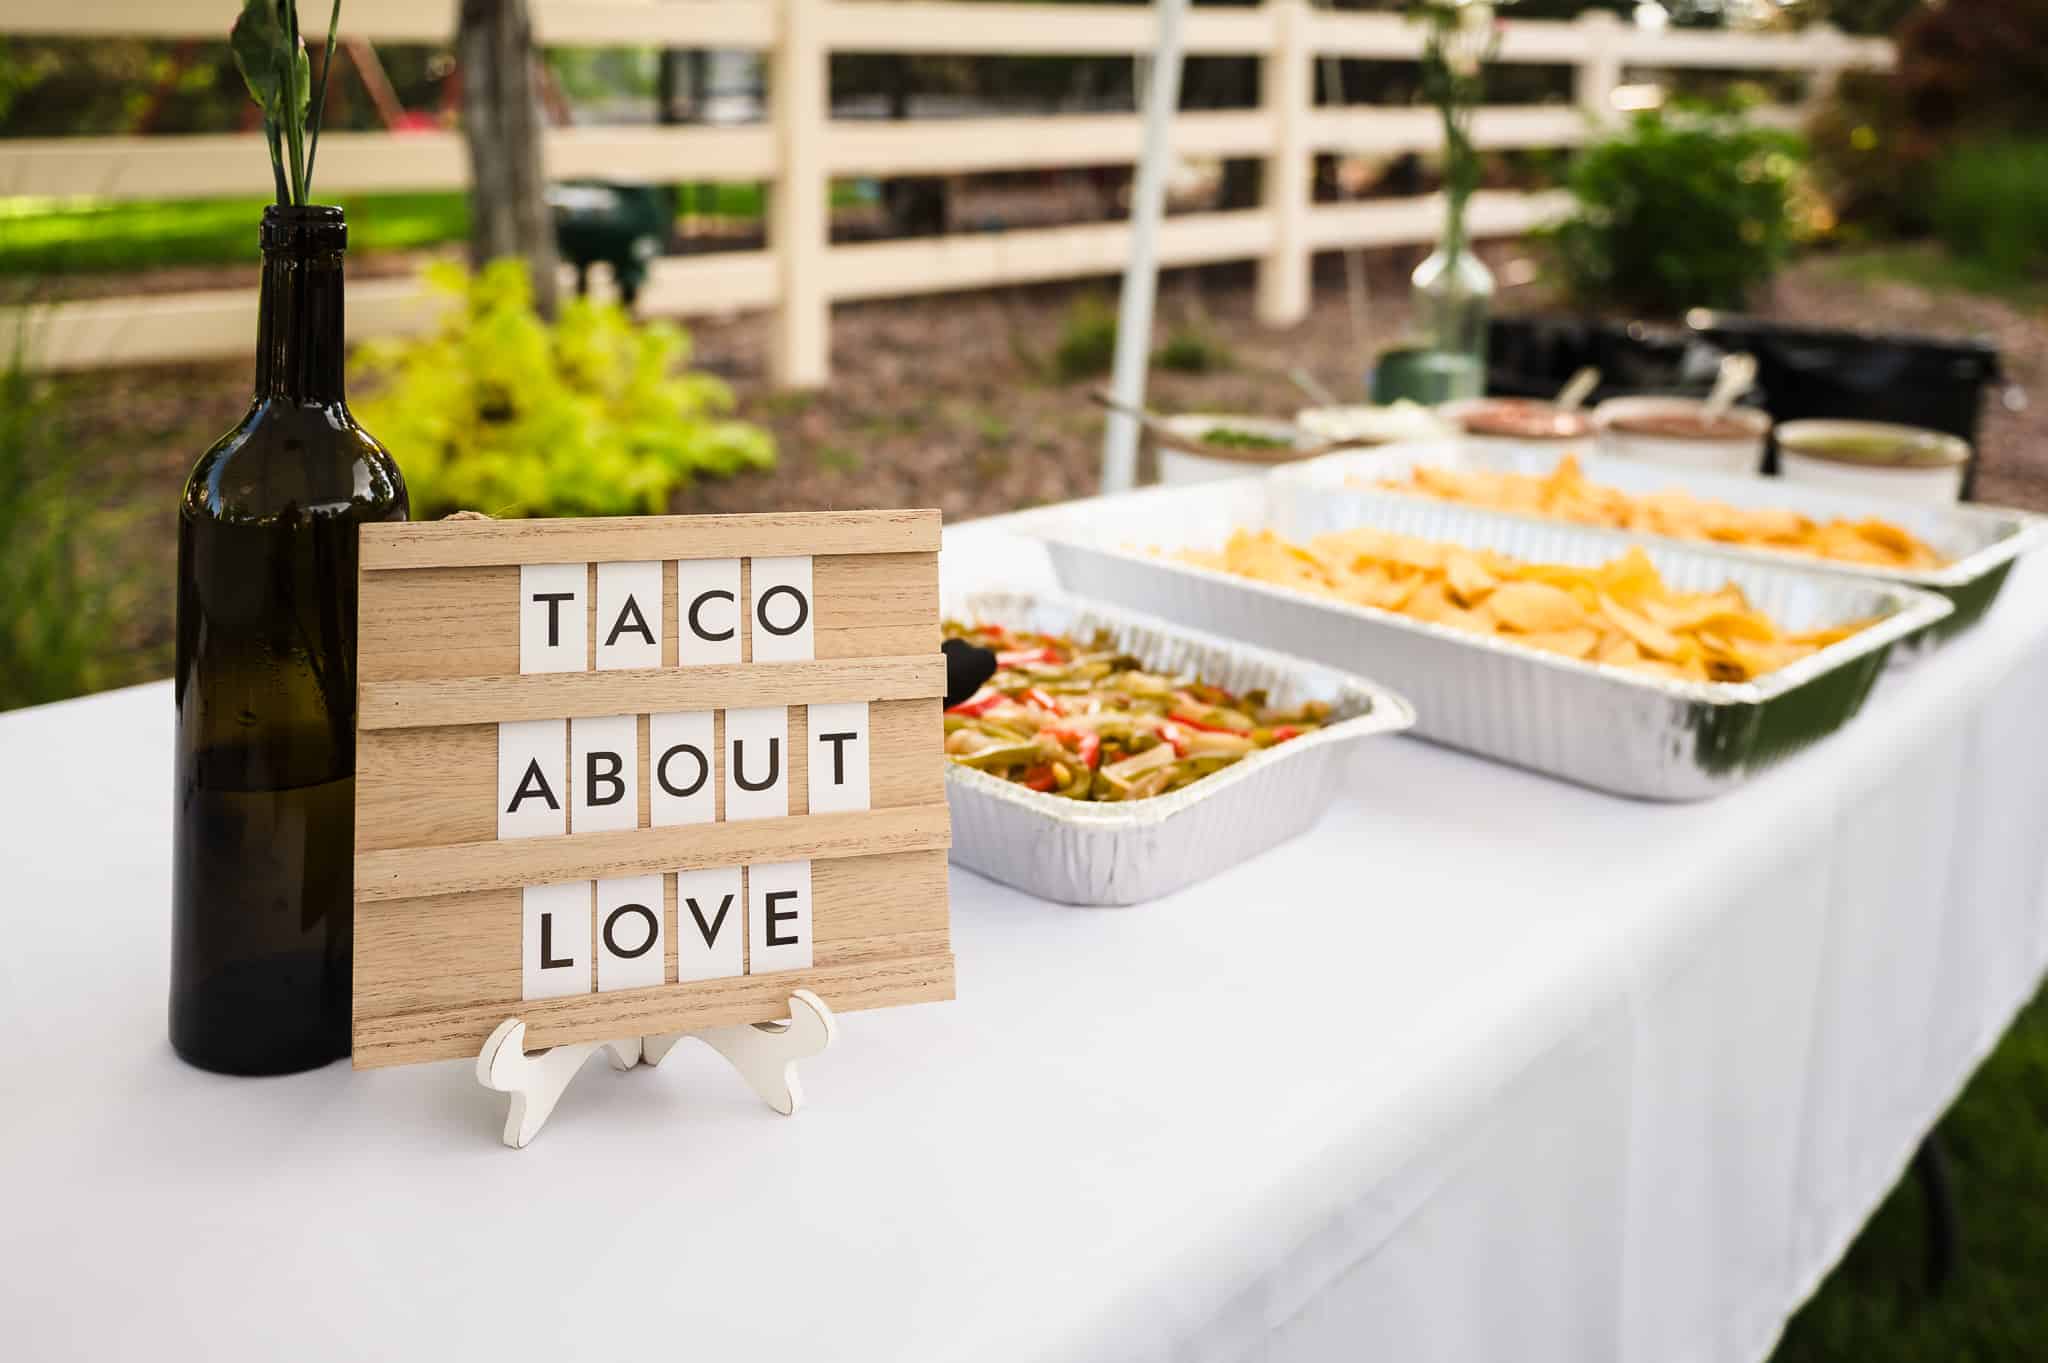 A sign reads "Taco about love" on a wedding buffet table.